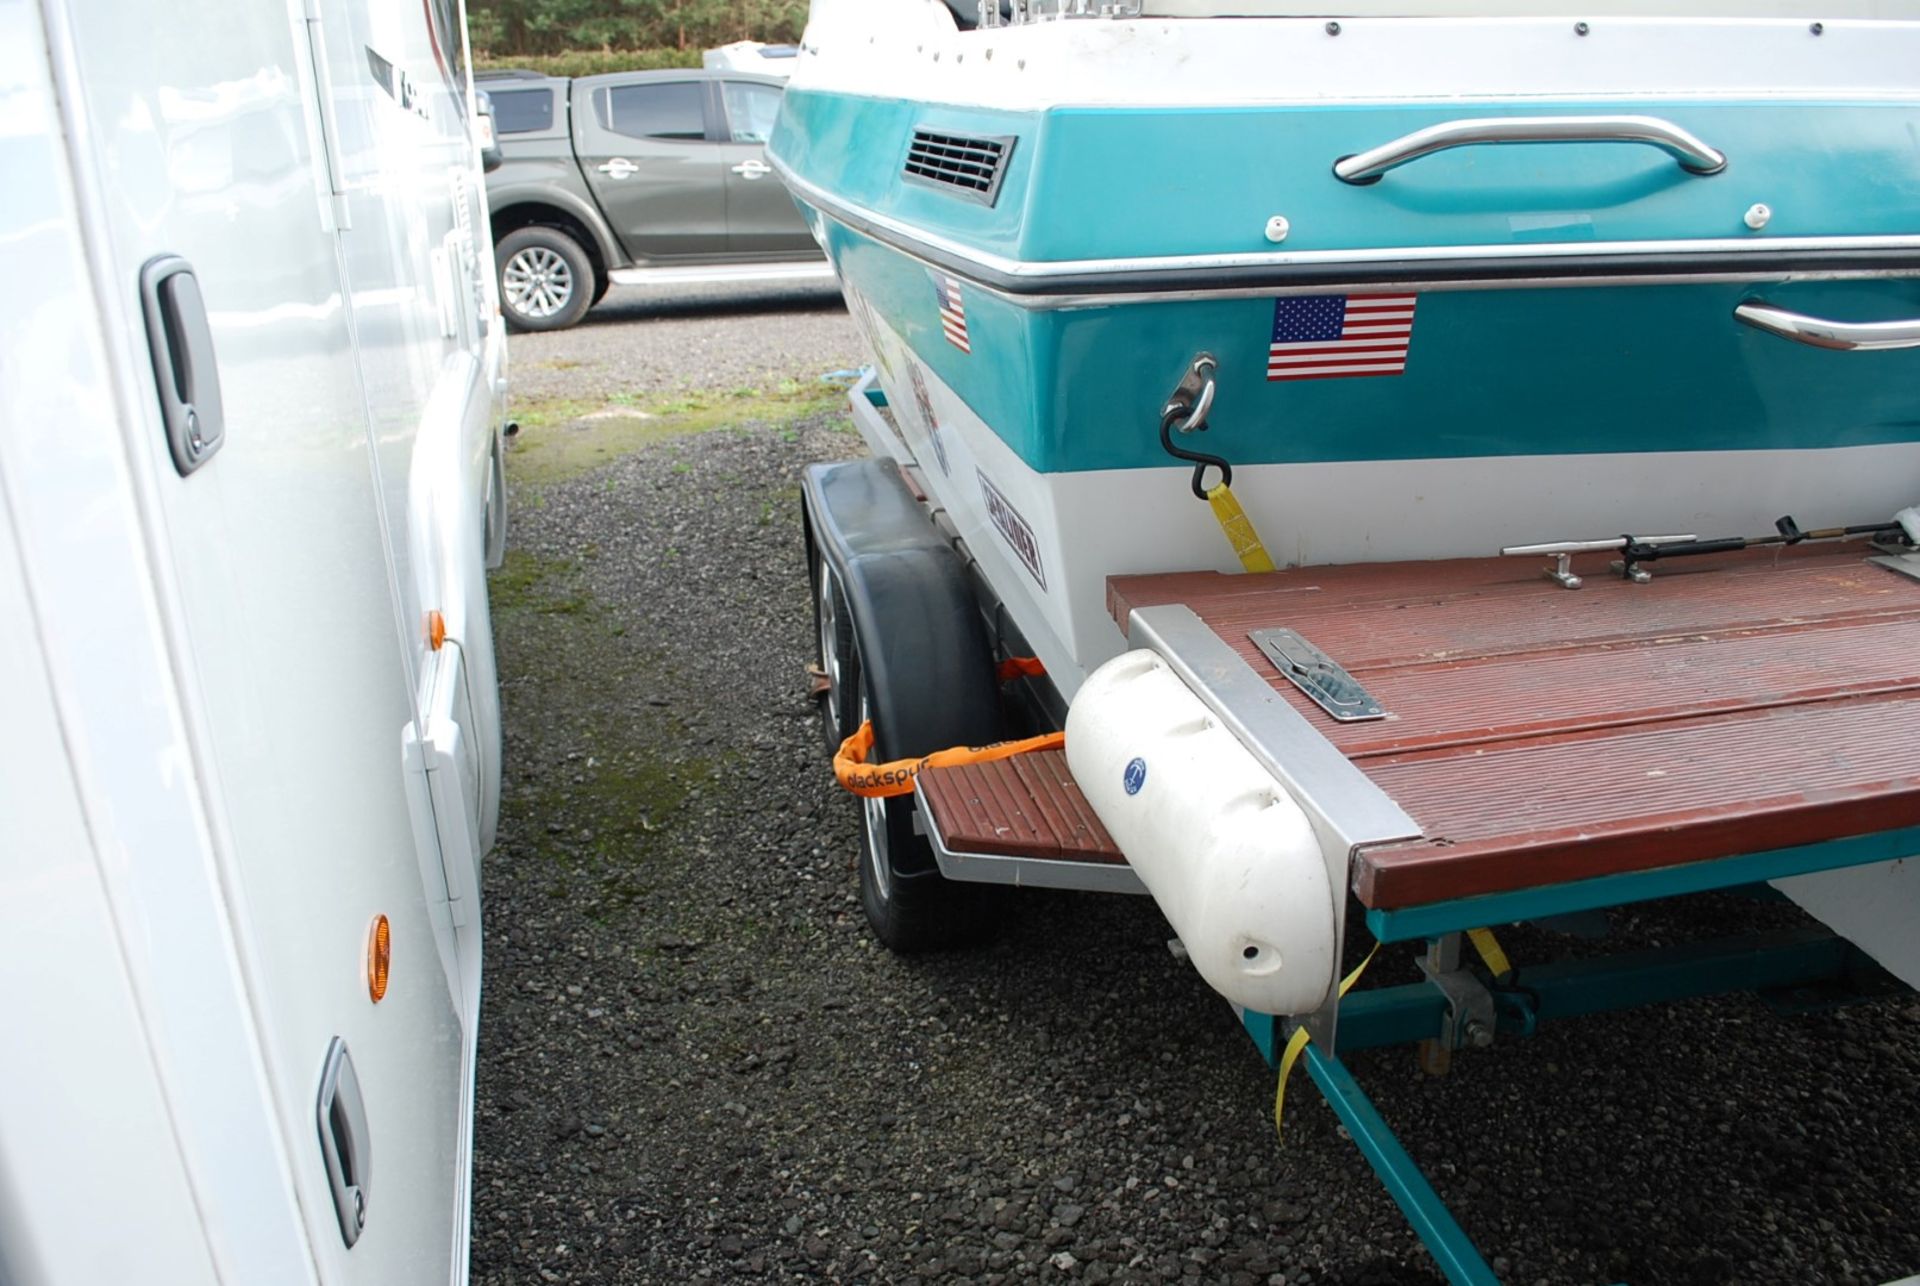 1 x "Sealiner 2002" 20ft Cuddy Outboard Engine Boat - Refitted Inside & Out - Includes Trailer - - Image 7 of 38